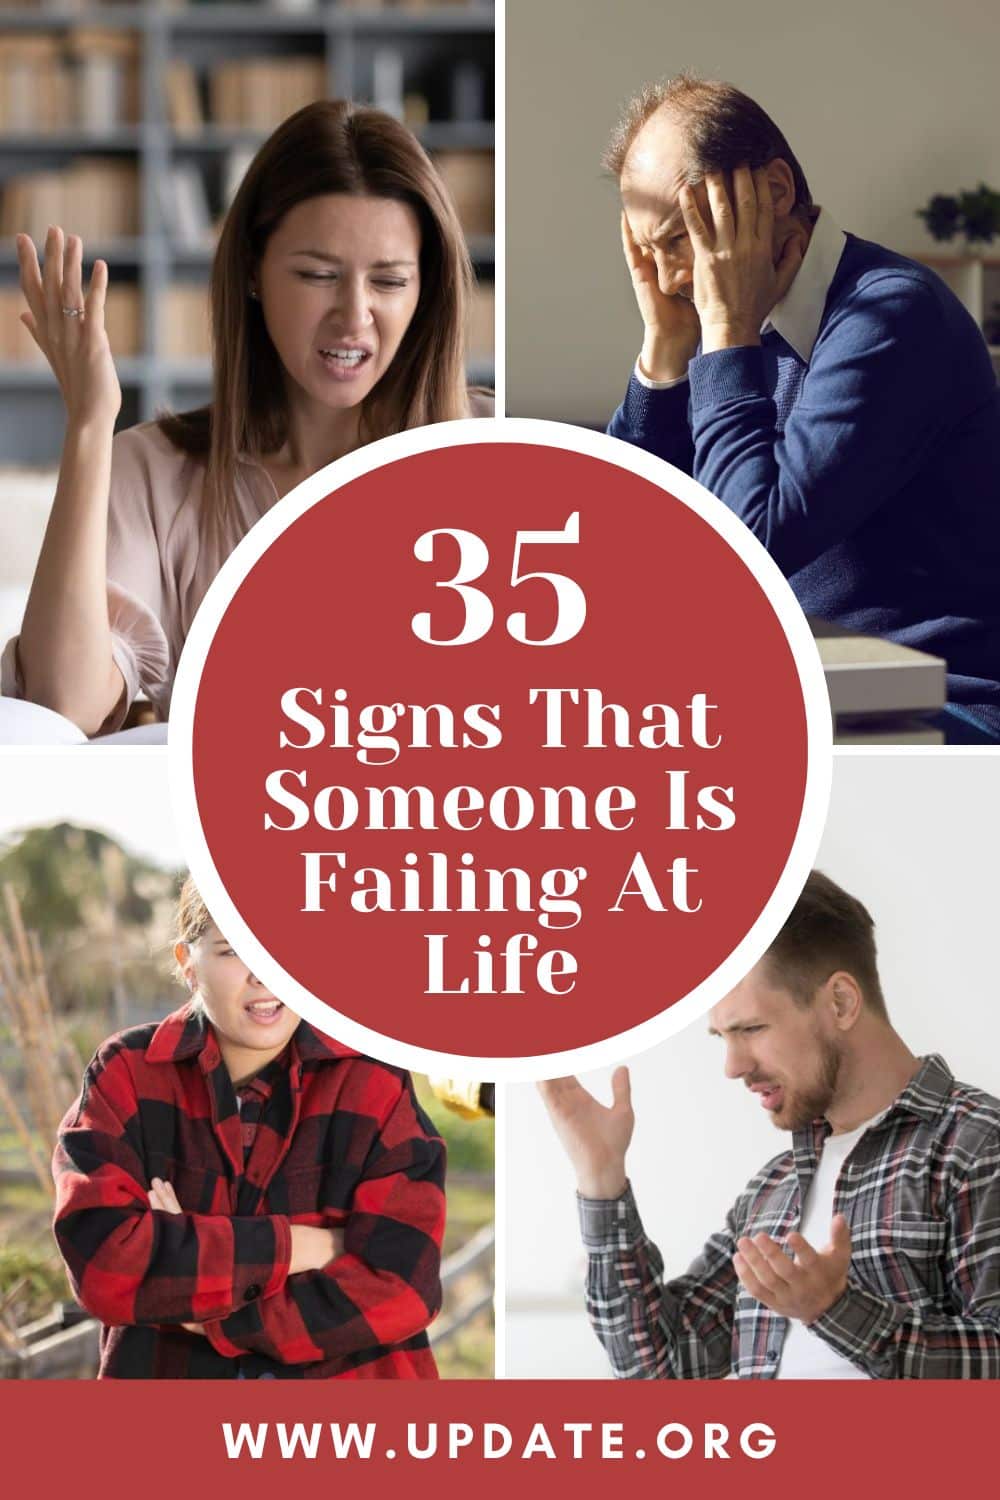 35 Signs That Someone Is Failing At Life pinterest image.